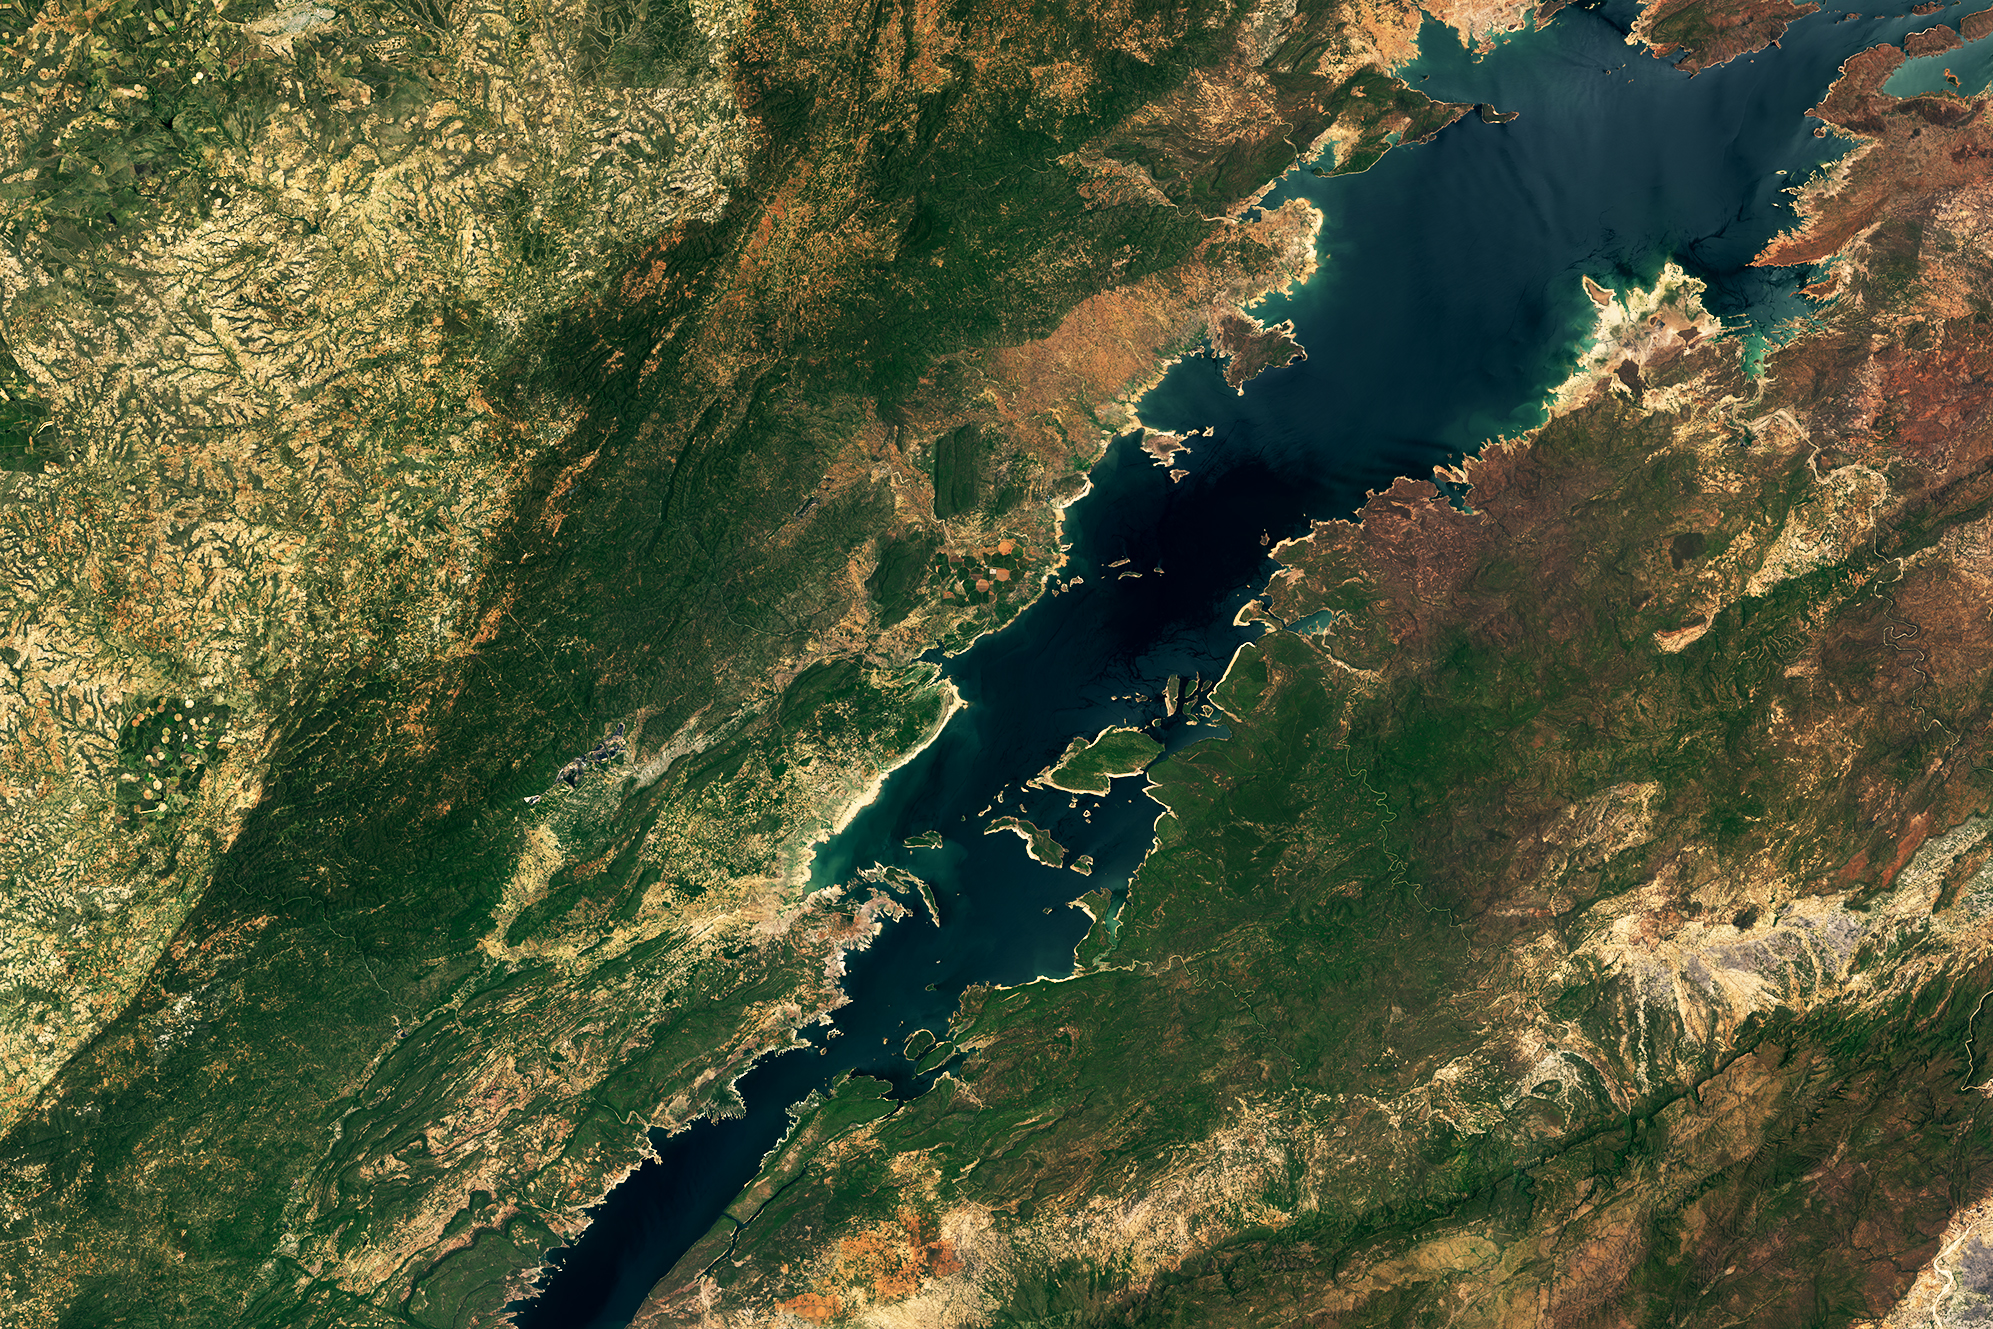 Low Water Level on Lake Kariba - related image preview